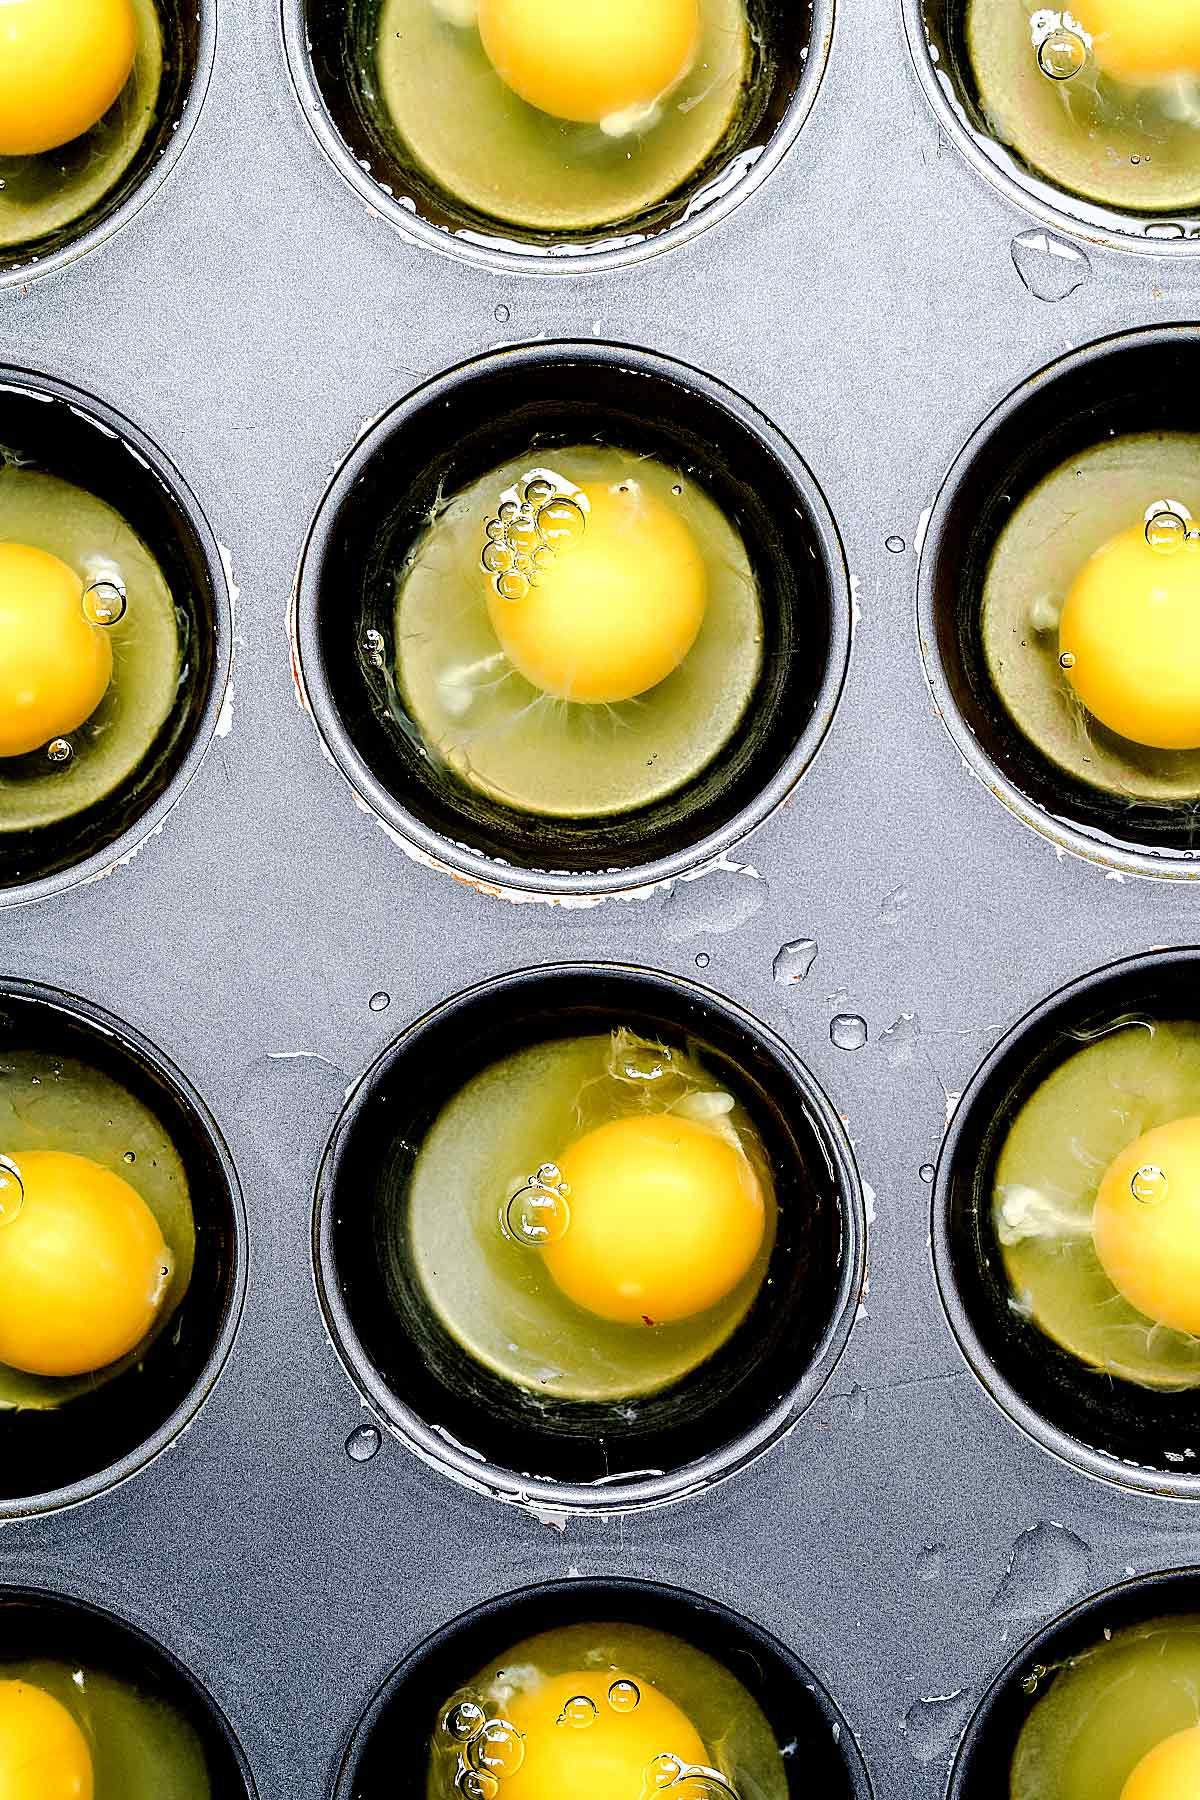 https://www.foodiecrush.com/poached-eggs/how-to-poach-eggs-foodiecrush-com-022/